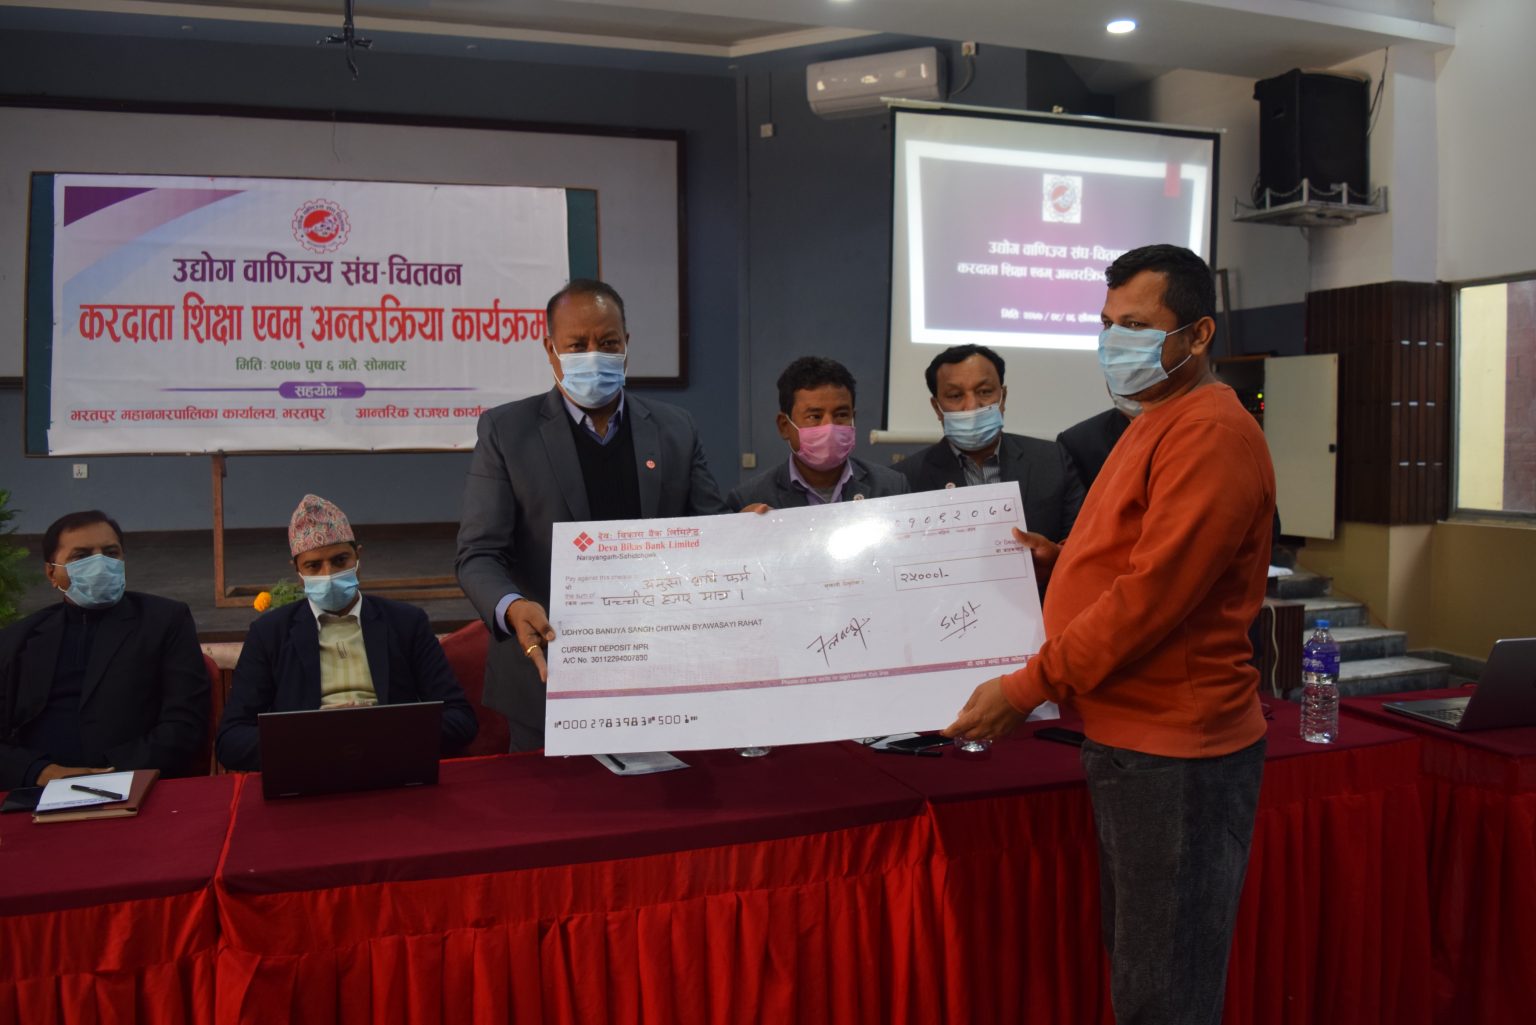 Cheque handover programme by Chitwan Chaber of Commerce & Industry Chitwan